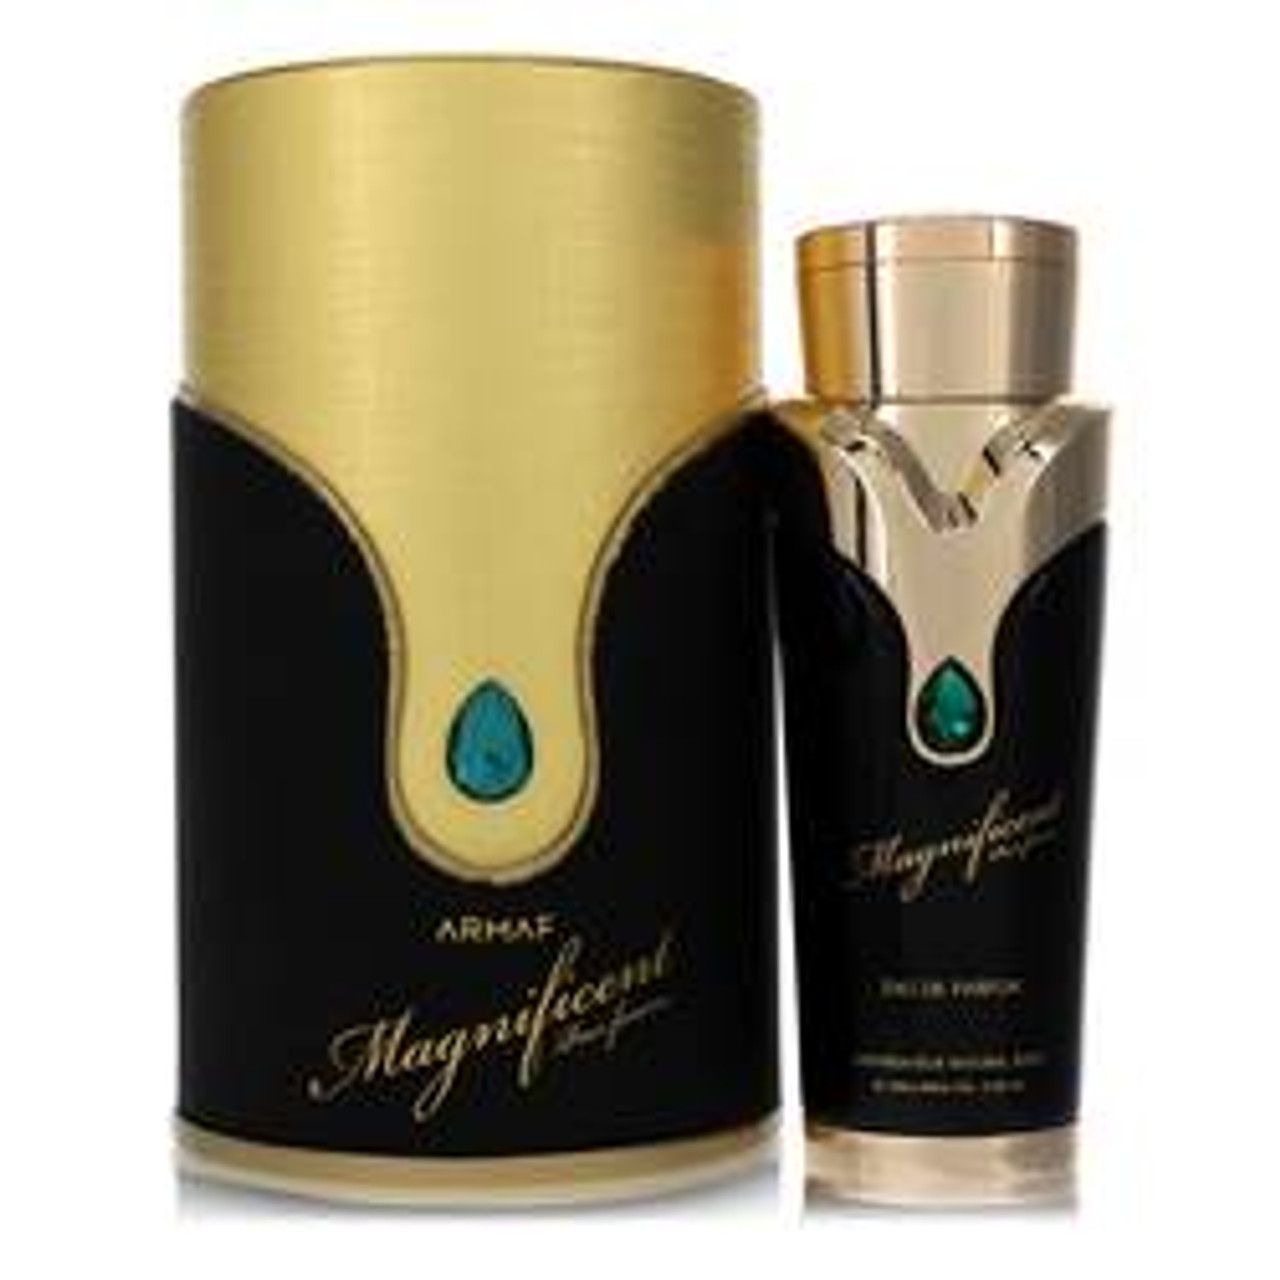 Armaf Magnificent Perfume By Armaf Eau De Parfum Spray 3.4 oz for Women - [From 128.00 - Choose pk Qty ] - *Ships from Miami